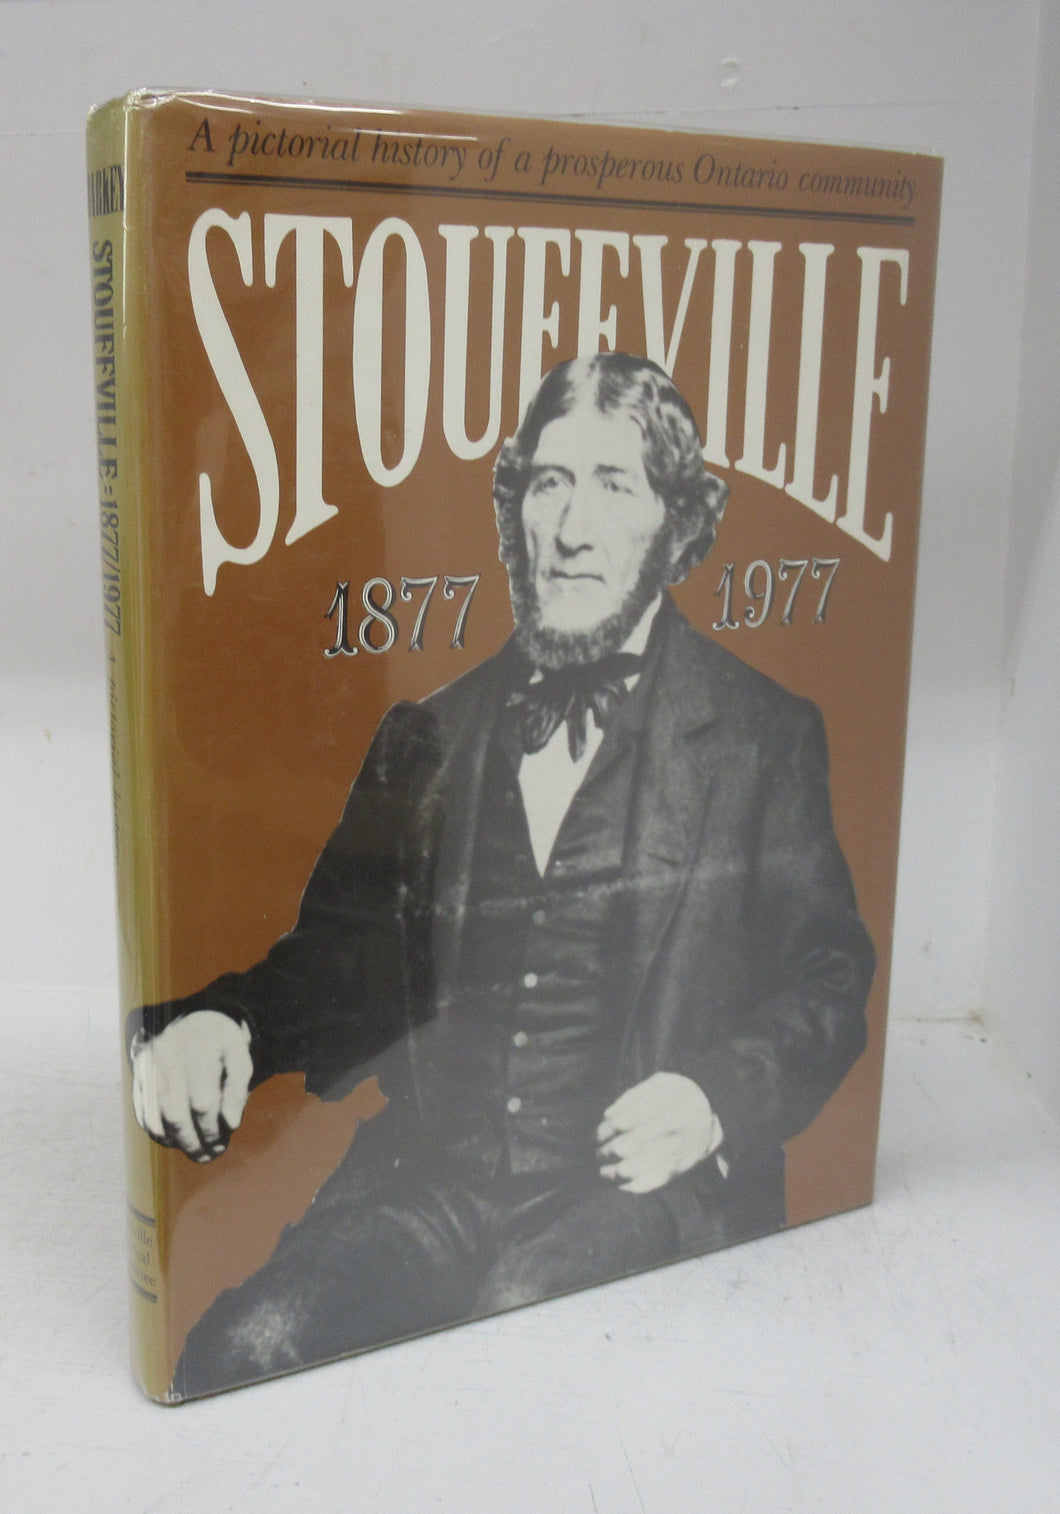 Stouffville 1877-1977: A pictorial history of a prosperous Ontario community